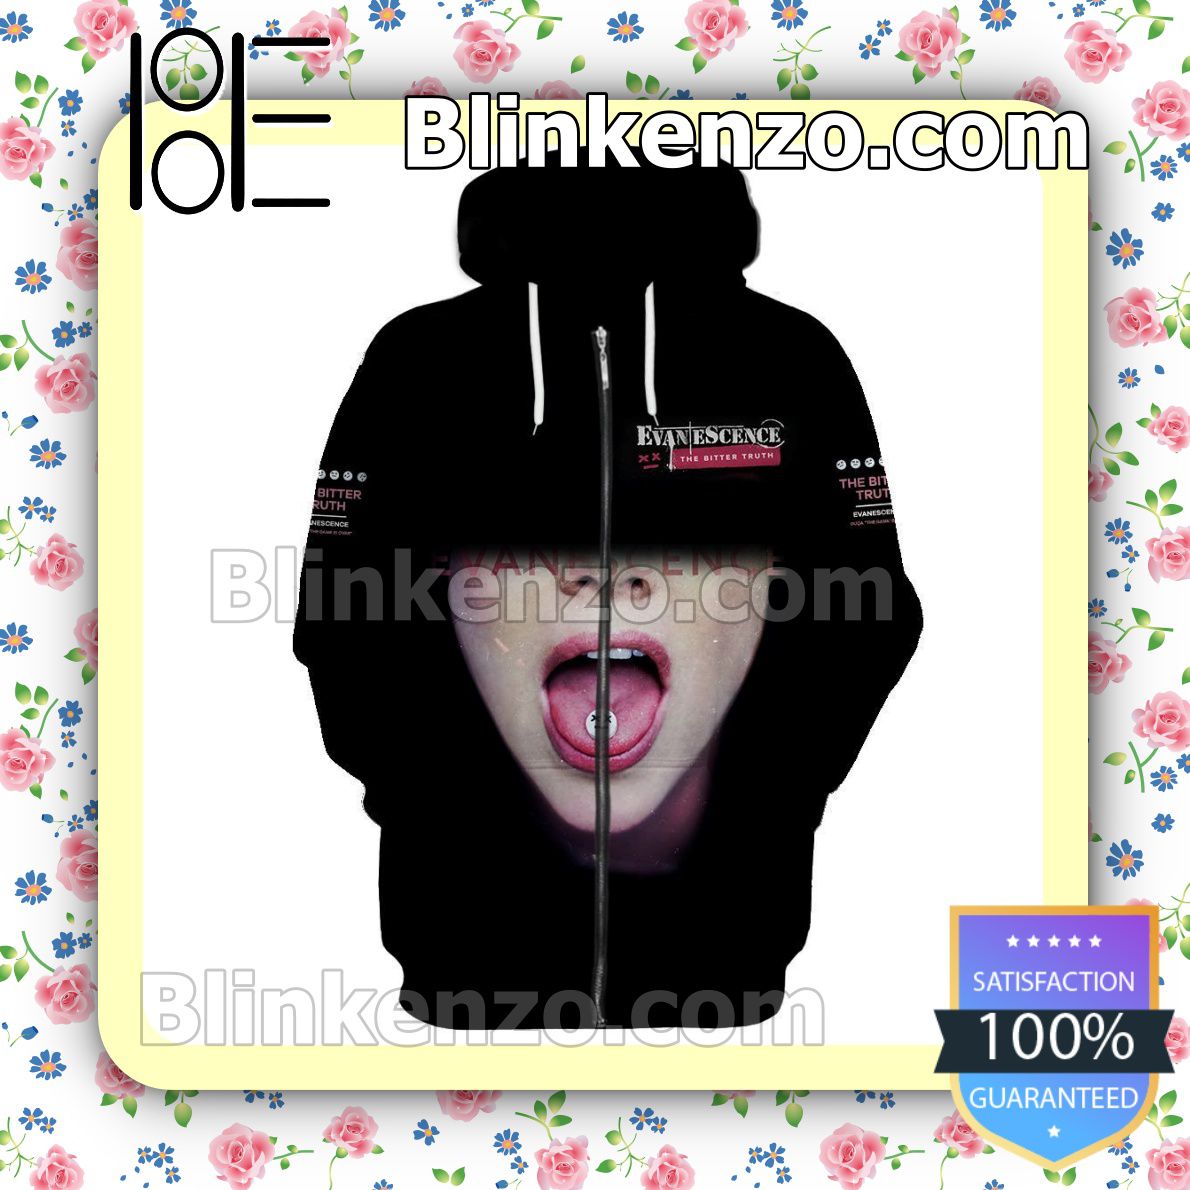 Personalized Evanescence The Bitter Truth Album Cover Hooded Sweatshirt